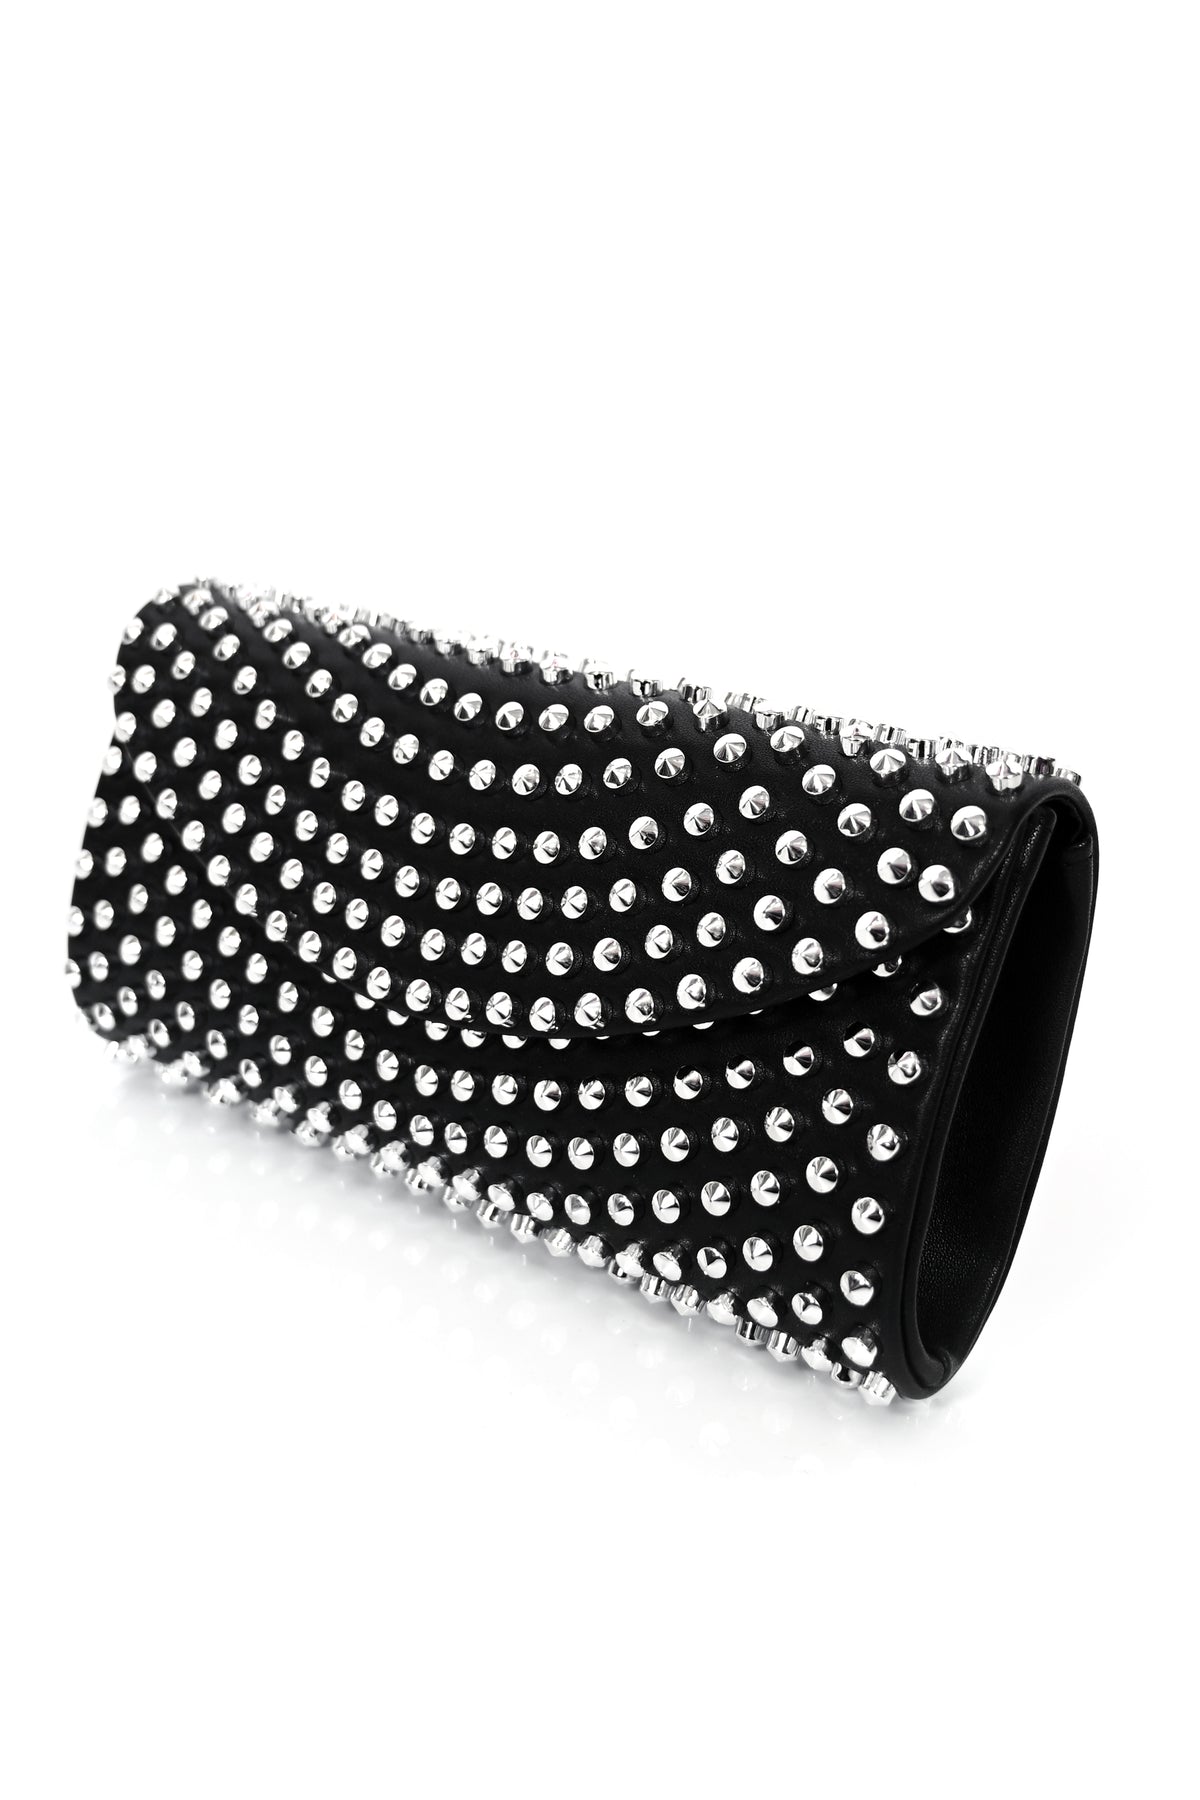 Envelope-style convertible clutch bag covered in silver studs.